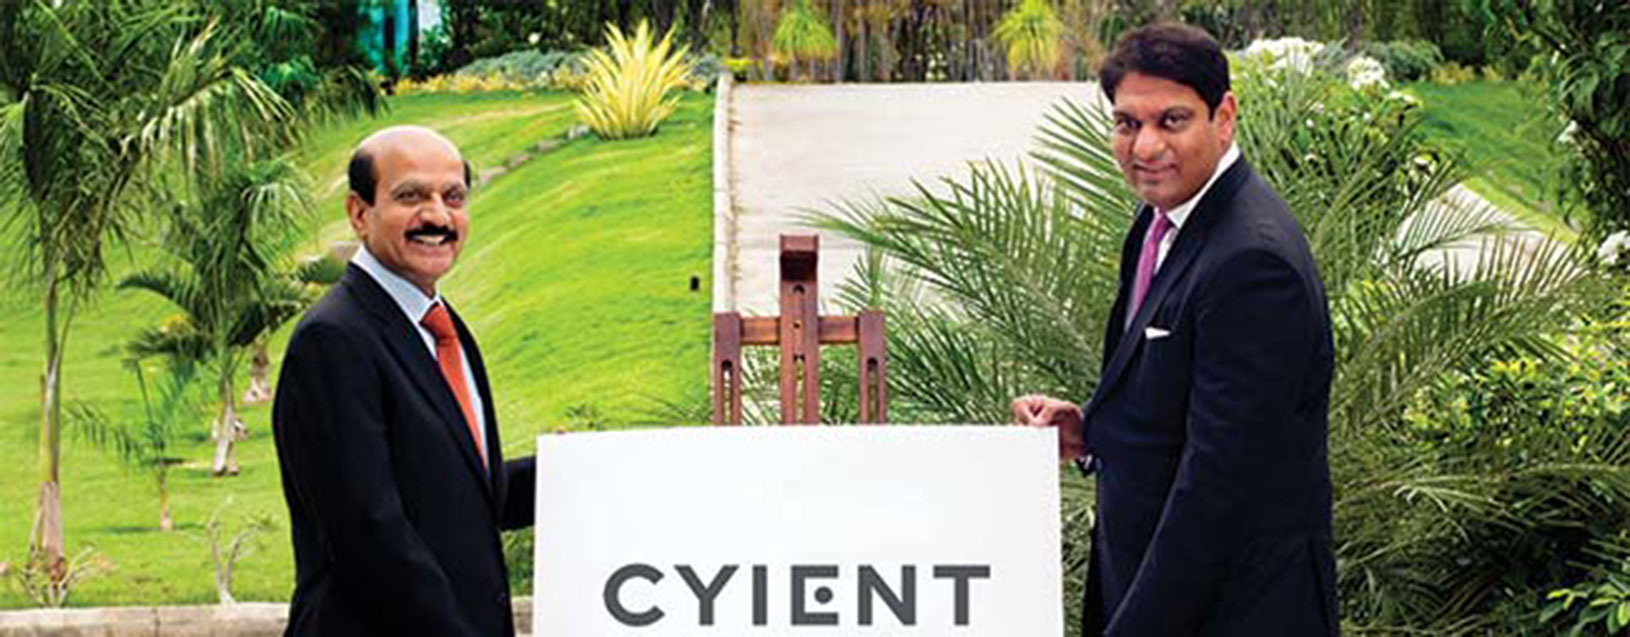 Cyient - New name. Old brilliance. March 2018 issue